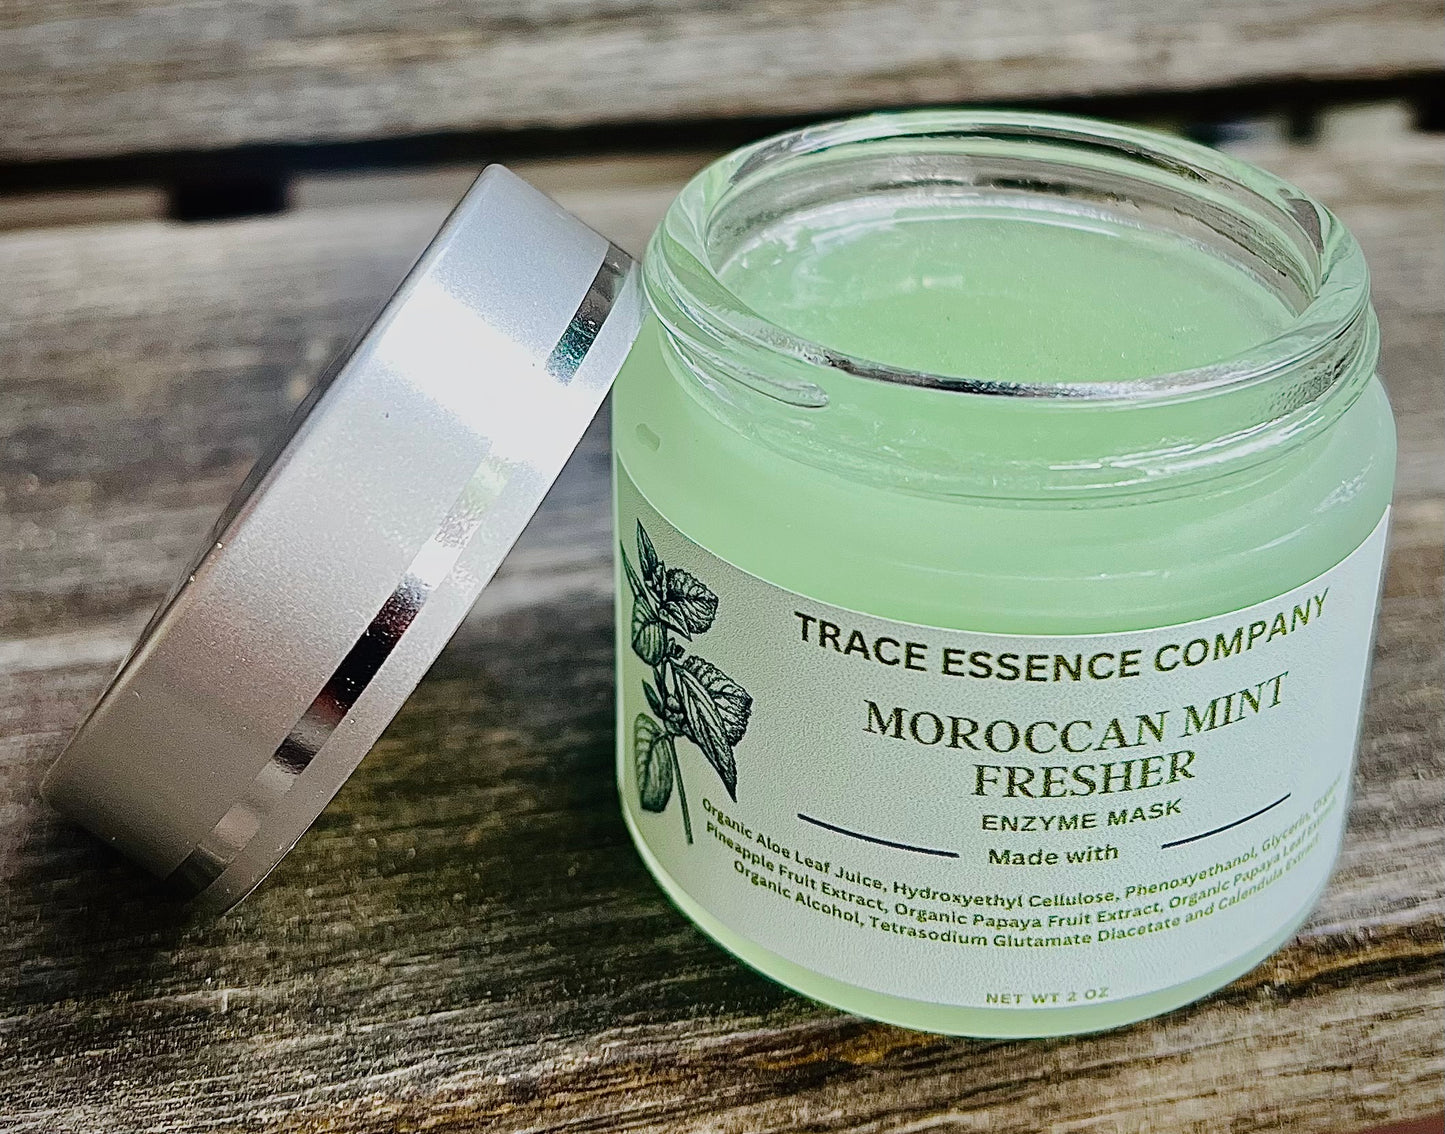 Moroccan Mint Refresher Enzyme Mask